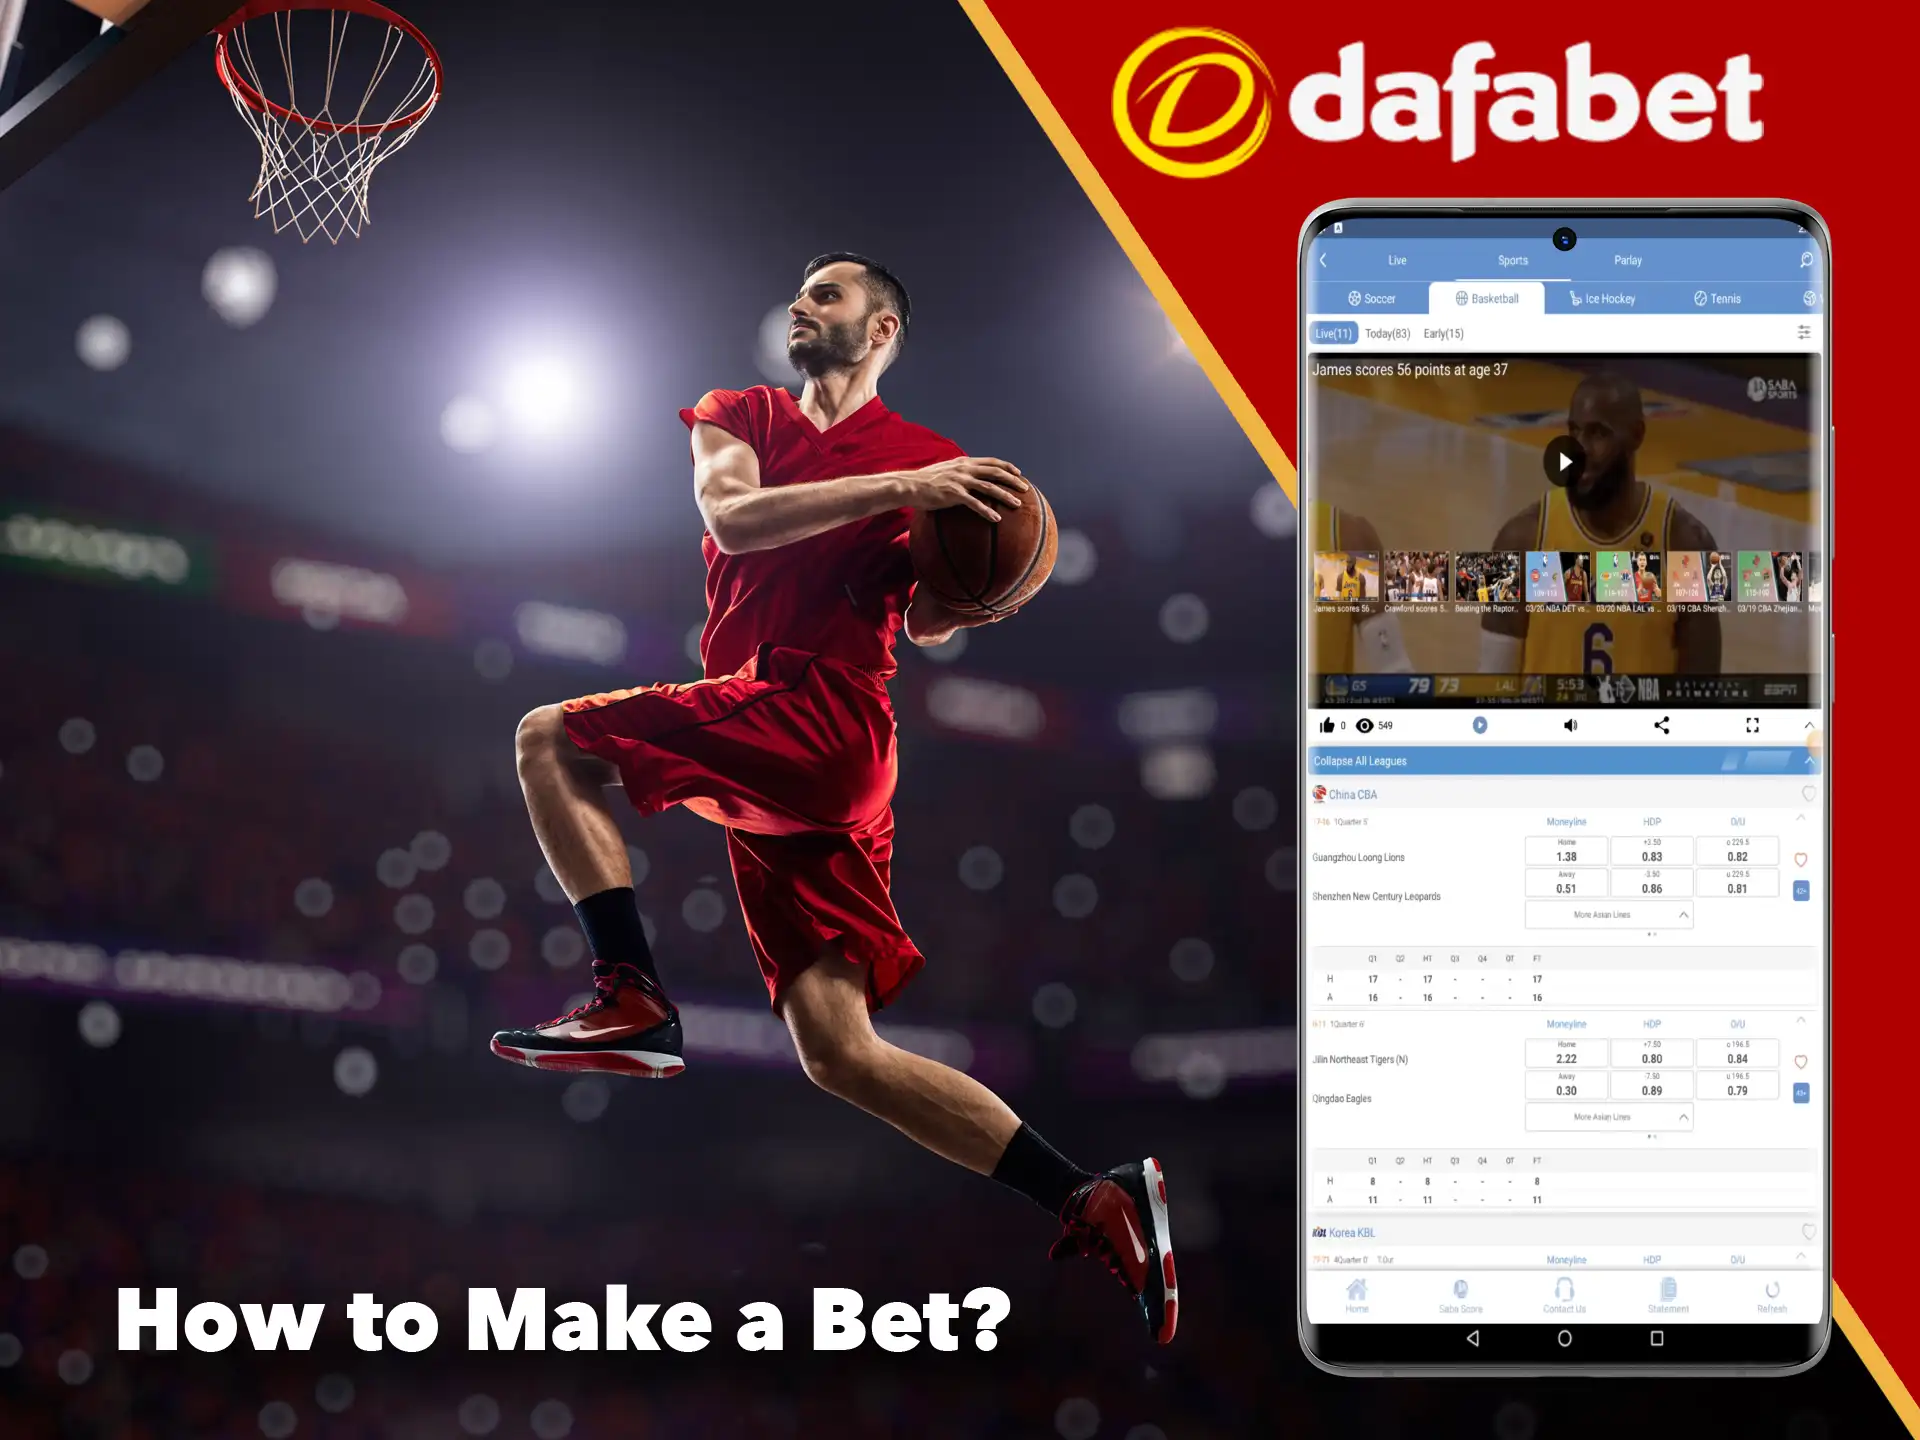 Simple steps to help you place a bet in Dafabet app.